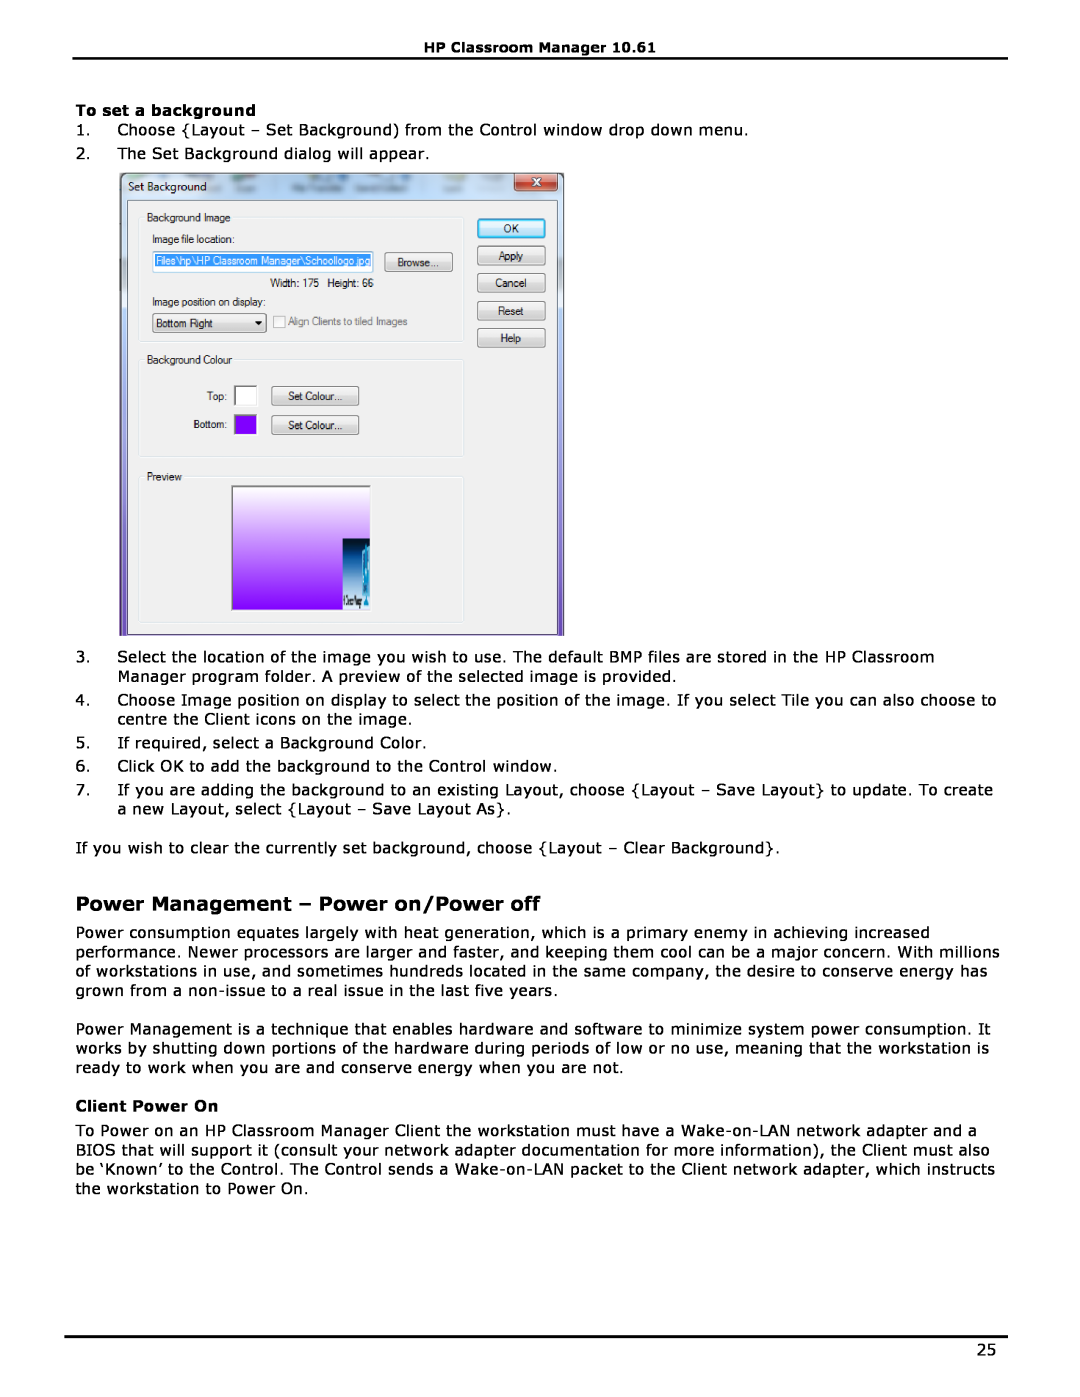 HP Classroom Manager manual Power Management - Power on/Power off, To set a background, Client Power On 